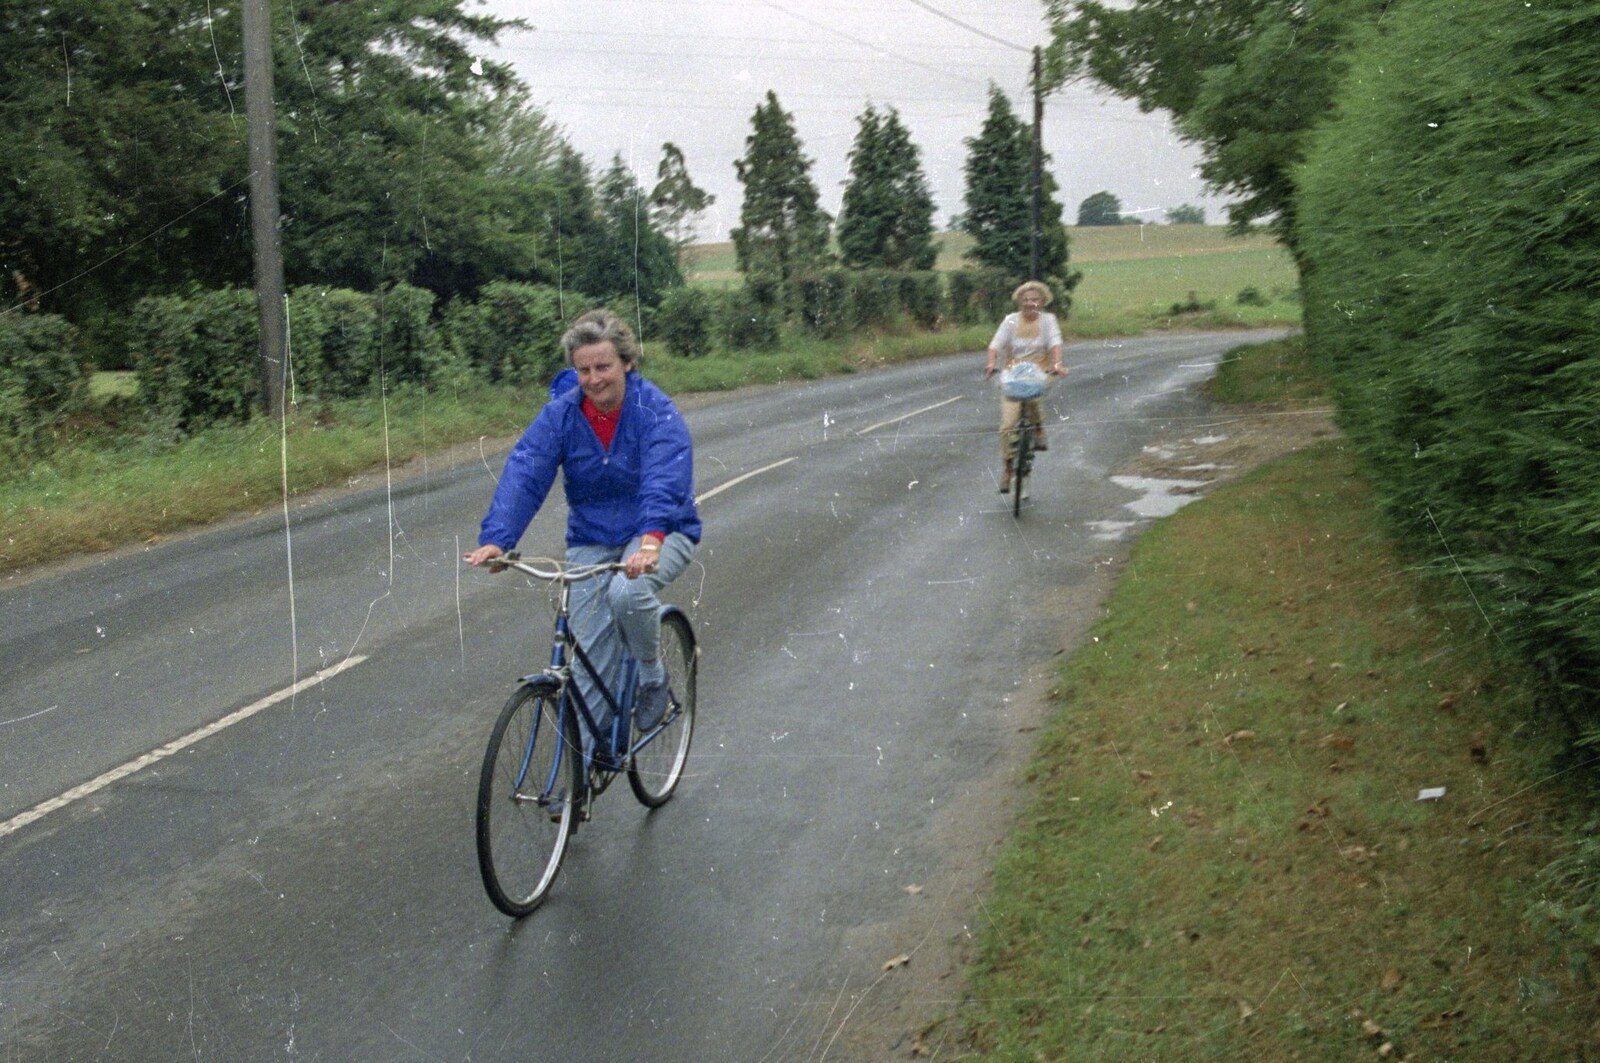 Linda peddles past from A Bike Ride to Redgrave, Suffolk - 11th August 1990